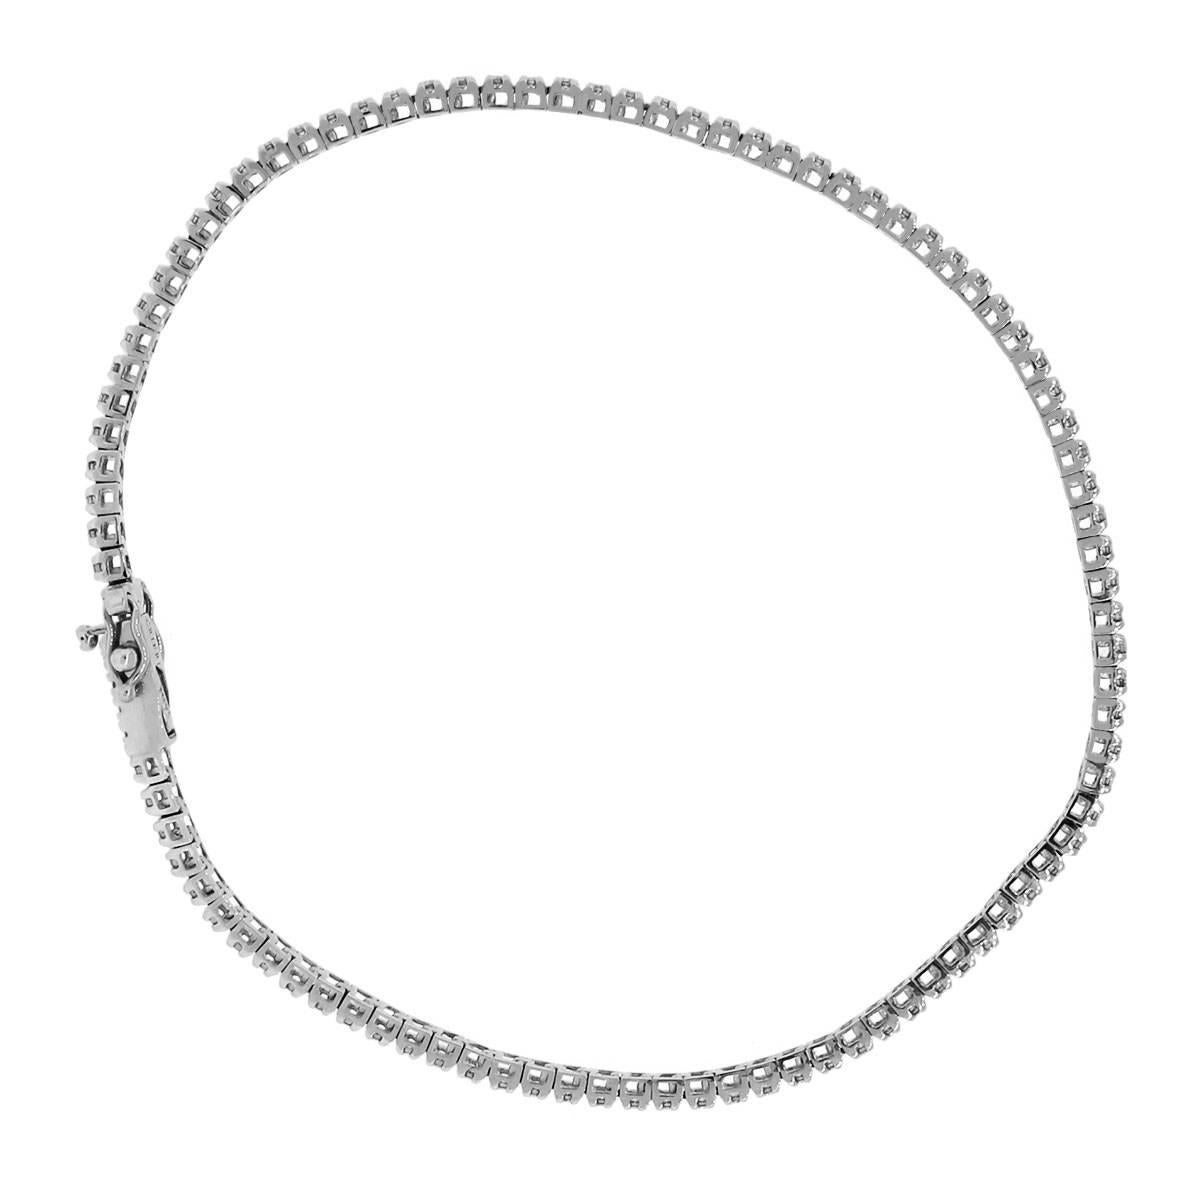 Material: 14k white gold
Diamond Details: Approximately 0.50ctw round brilliant cut diamonds. Diamonds are G in color and SI in clarity.
Measurements: will fit up to a 7″ wrist
Weight: 4.4g (2.8dwt)
Clasp: Tongue in box Clasp
Additional Info: Comes